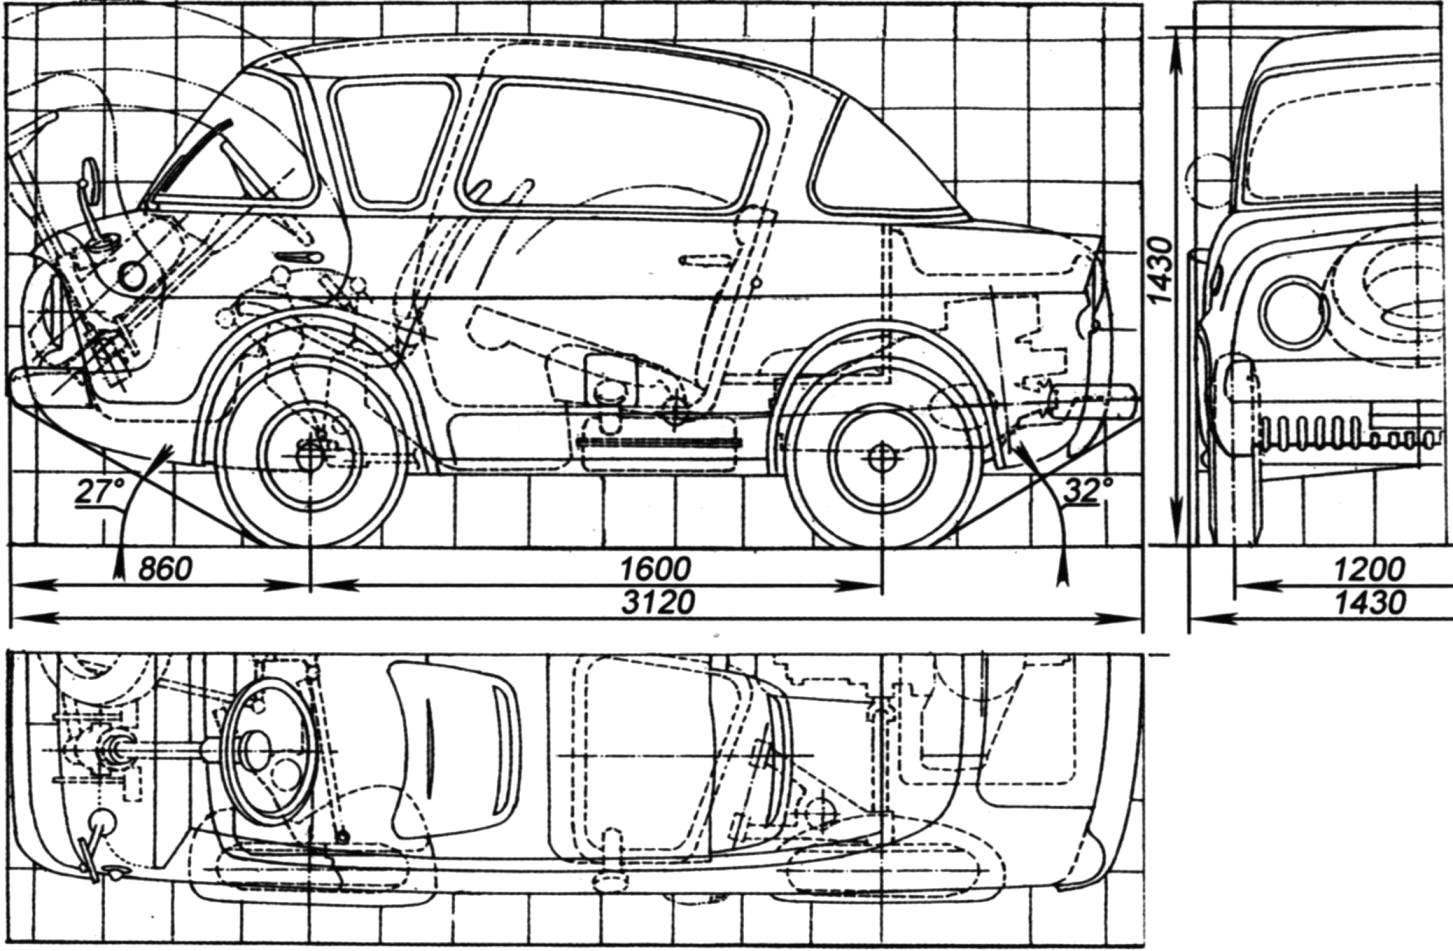 The layout and dimensions of the car 